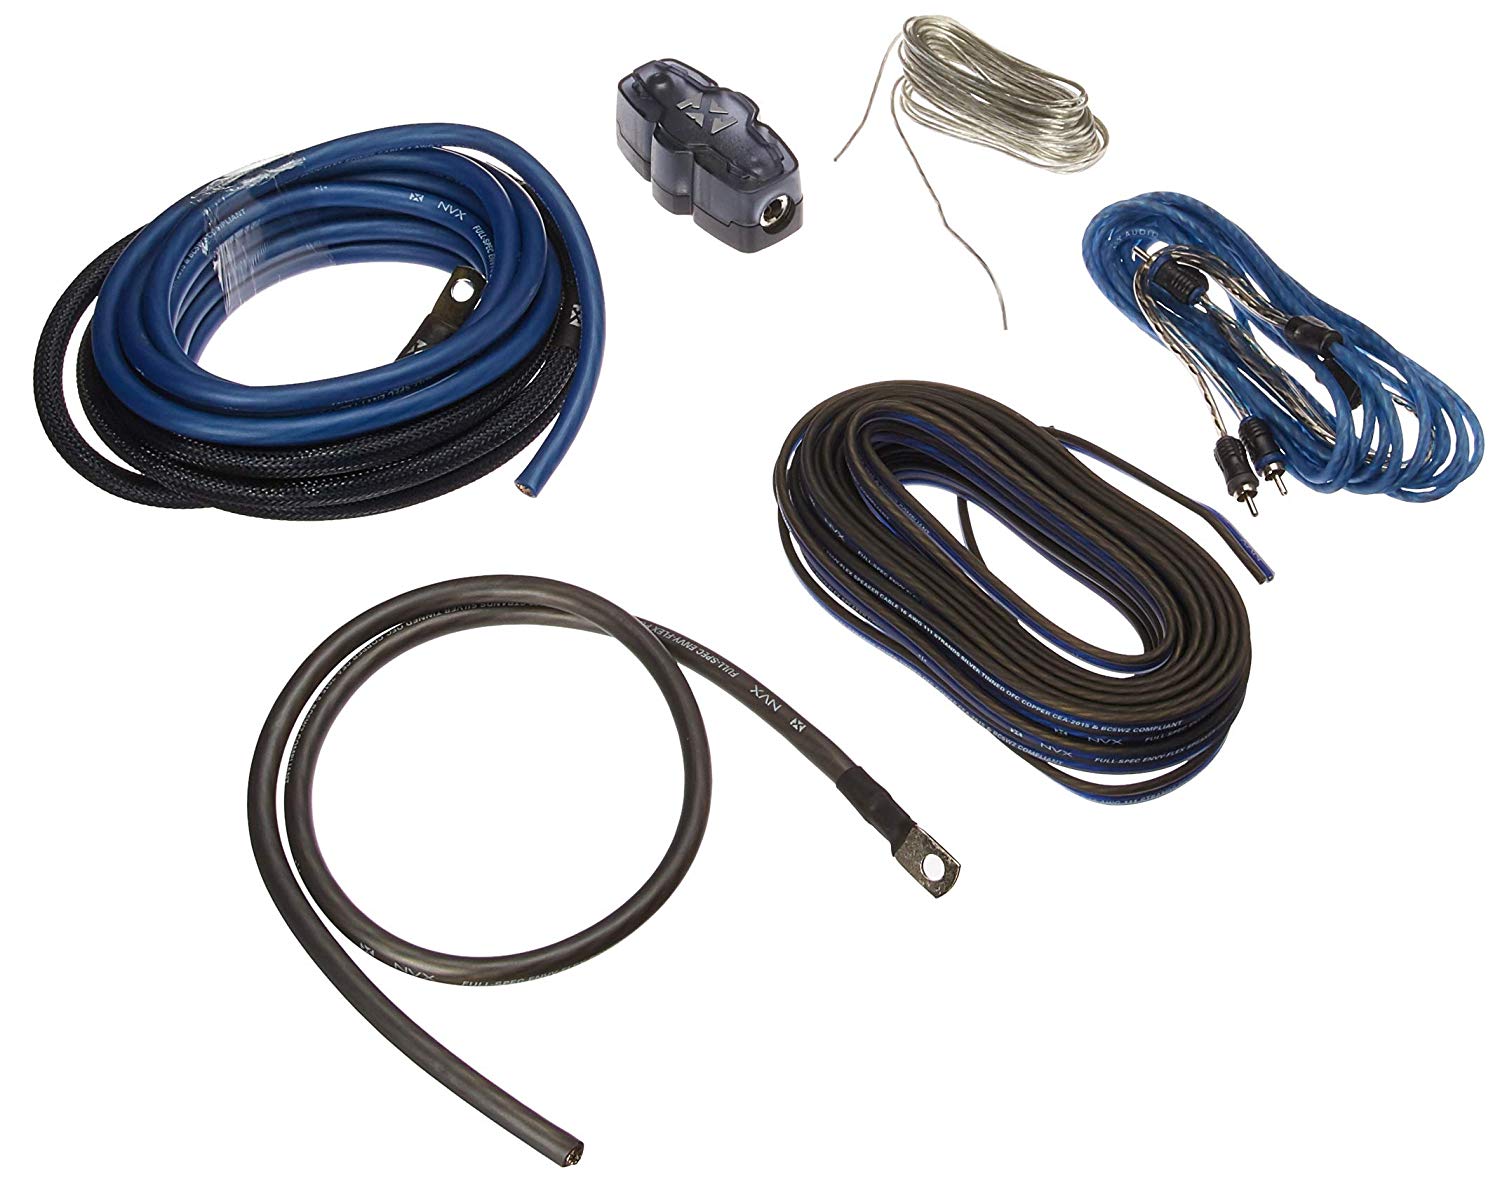 NVX 100% Copper 4-Gauge Car Amp Install Kit w/ 2-Channel RCA, Up to 1000 Watts RMS [XKIT42]